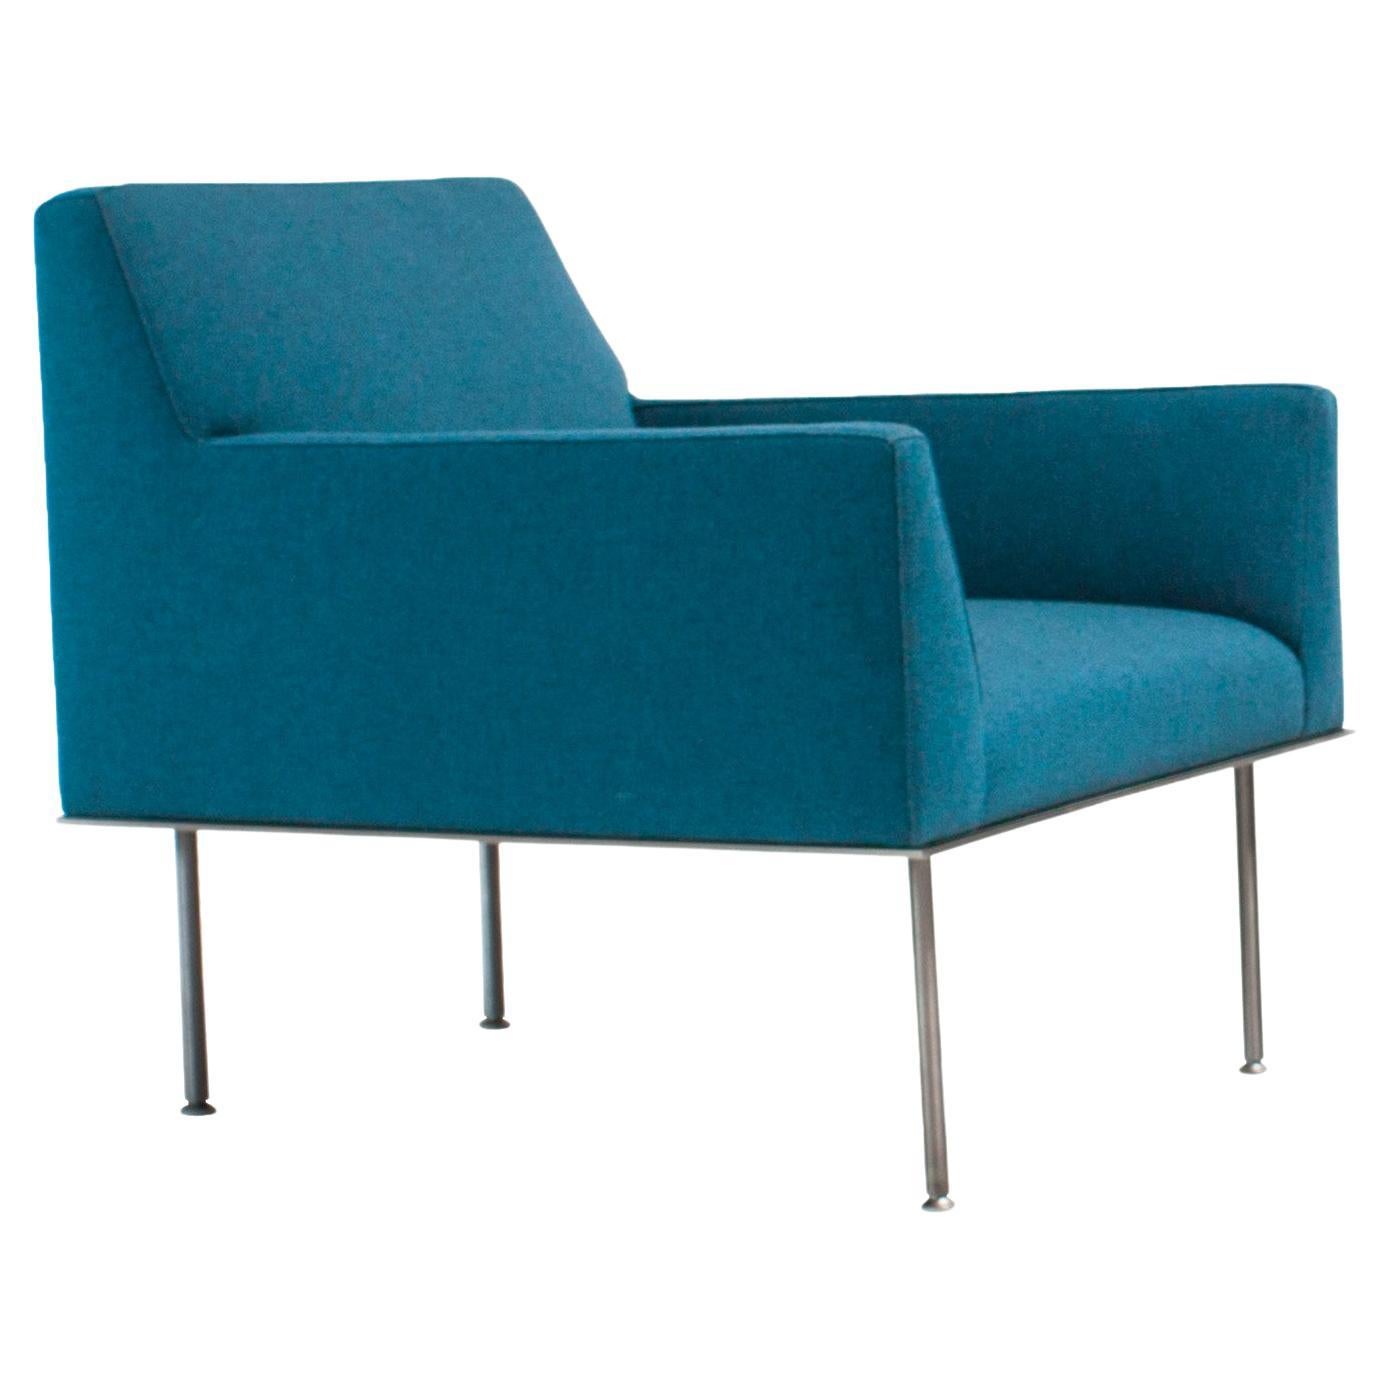 Vioski New Century Modern Angeles Lounge Chair in Reef Bright Blue For Sale